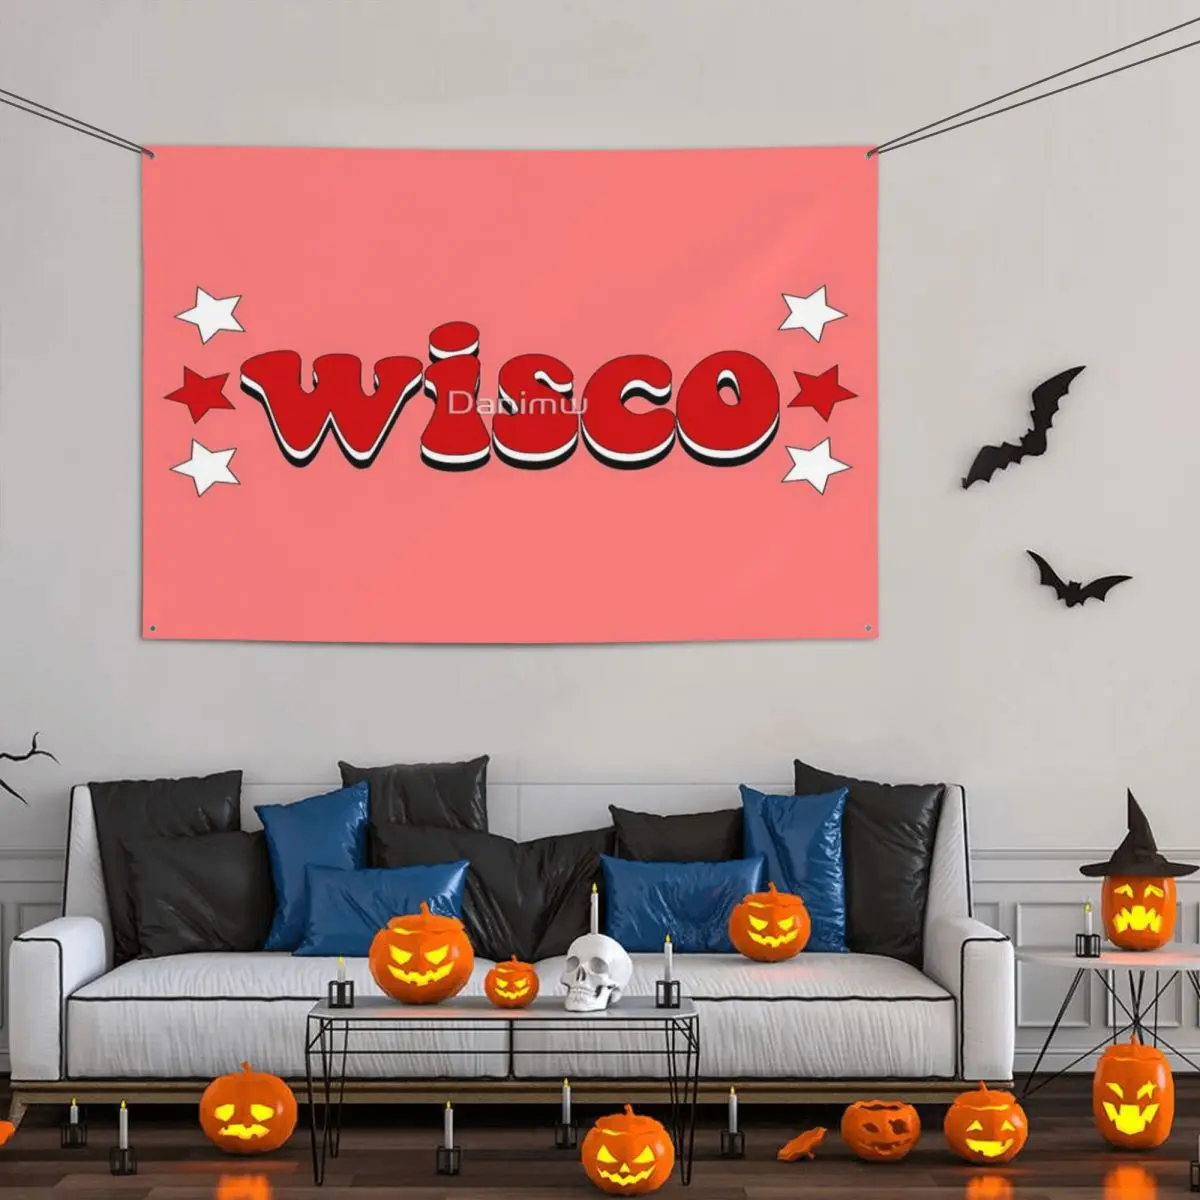 

Wisconsin Stars Party Banner Decor 120x180cm Polyester Material With Metal Grommets Fade Resistant Flowy Bright Color